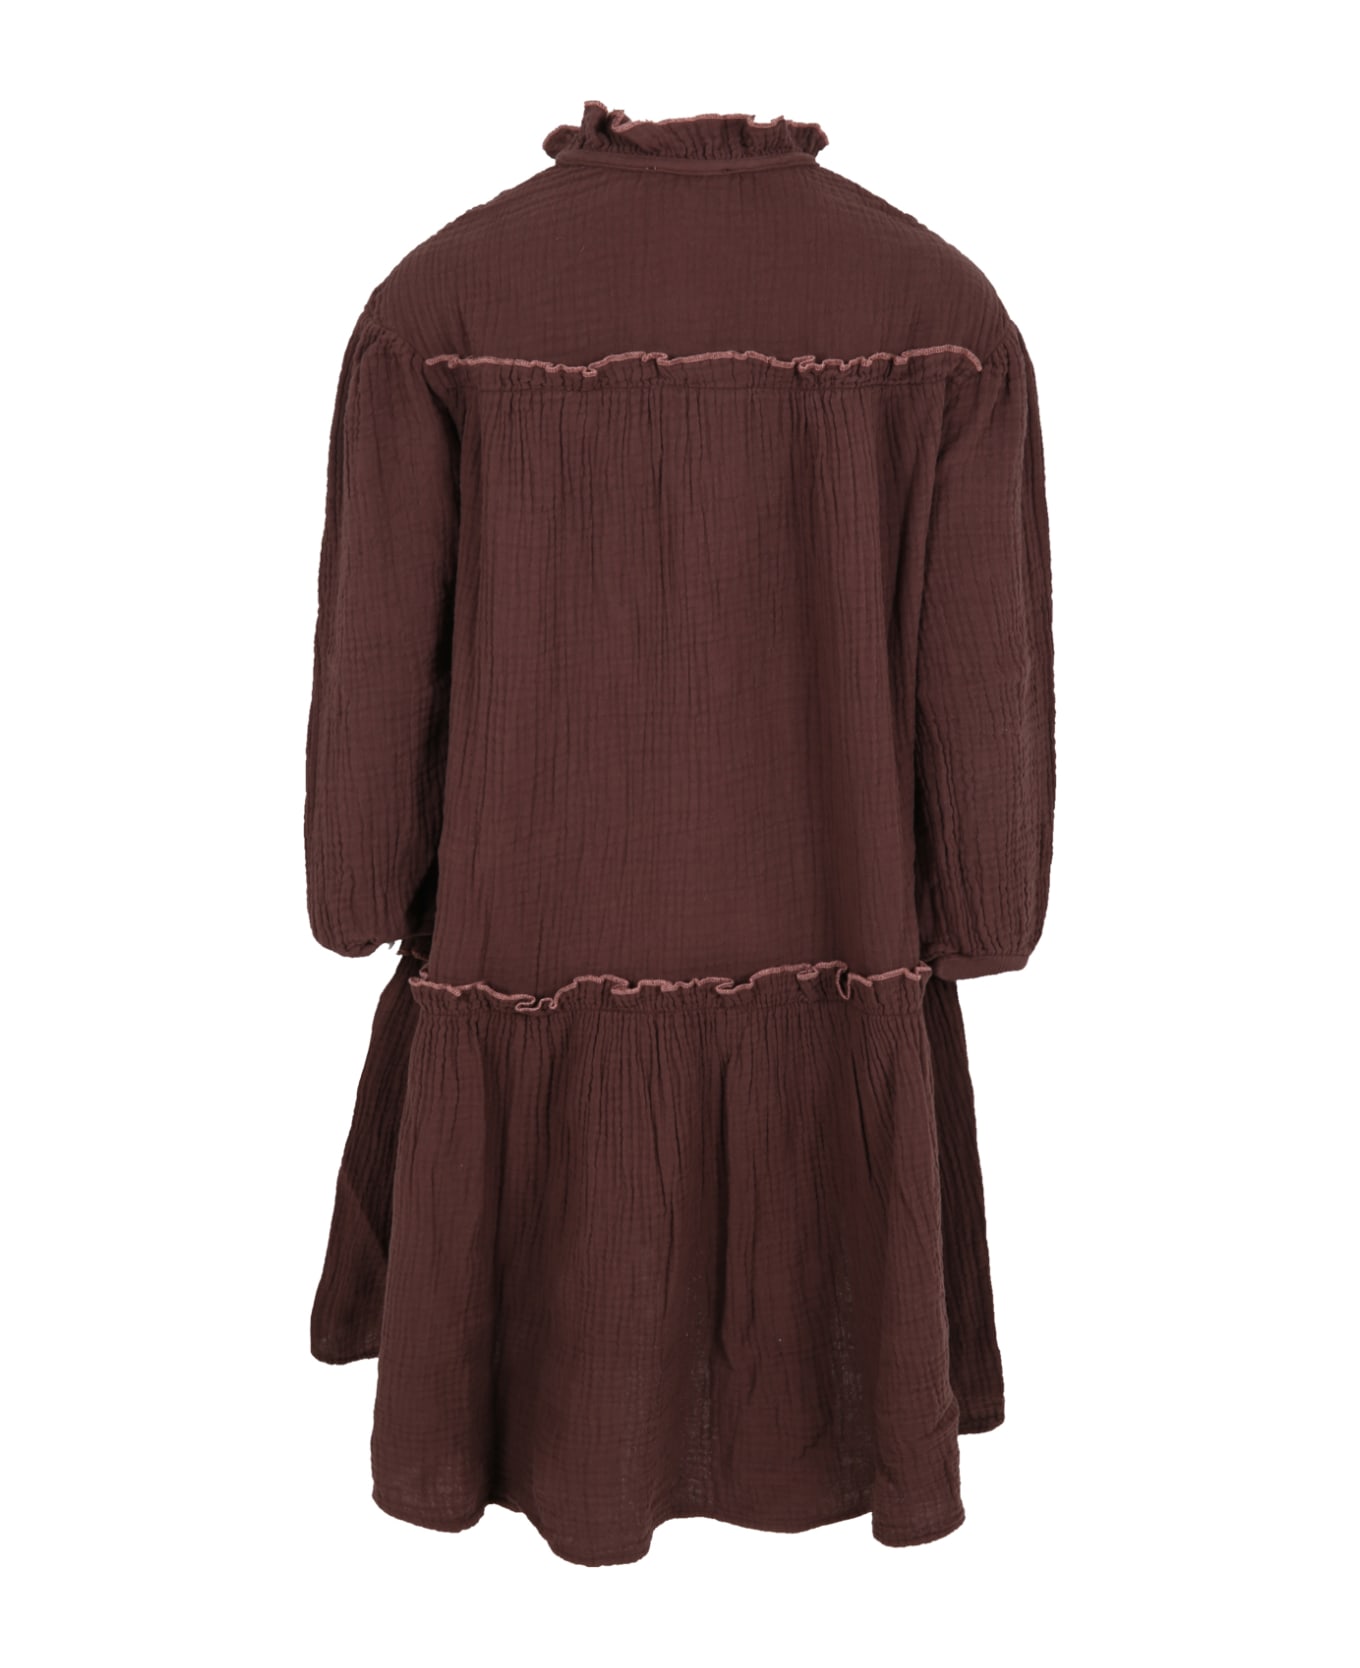 Coco Au Lait Brown Dress For Girl With Flowers - Brown